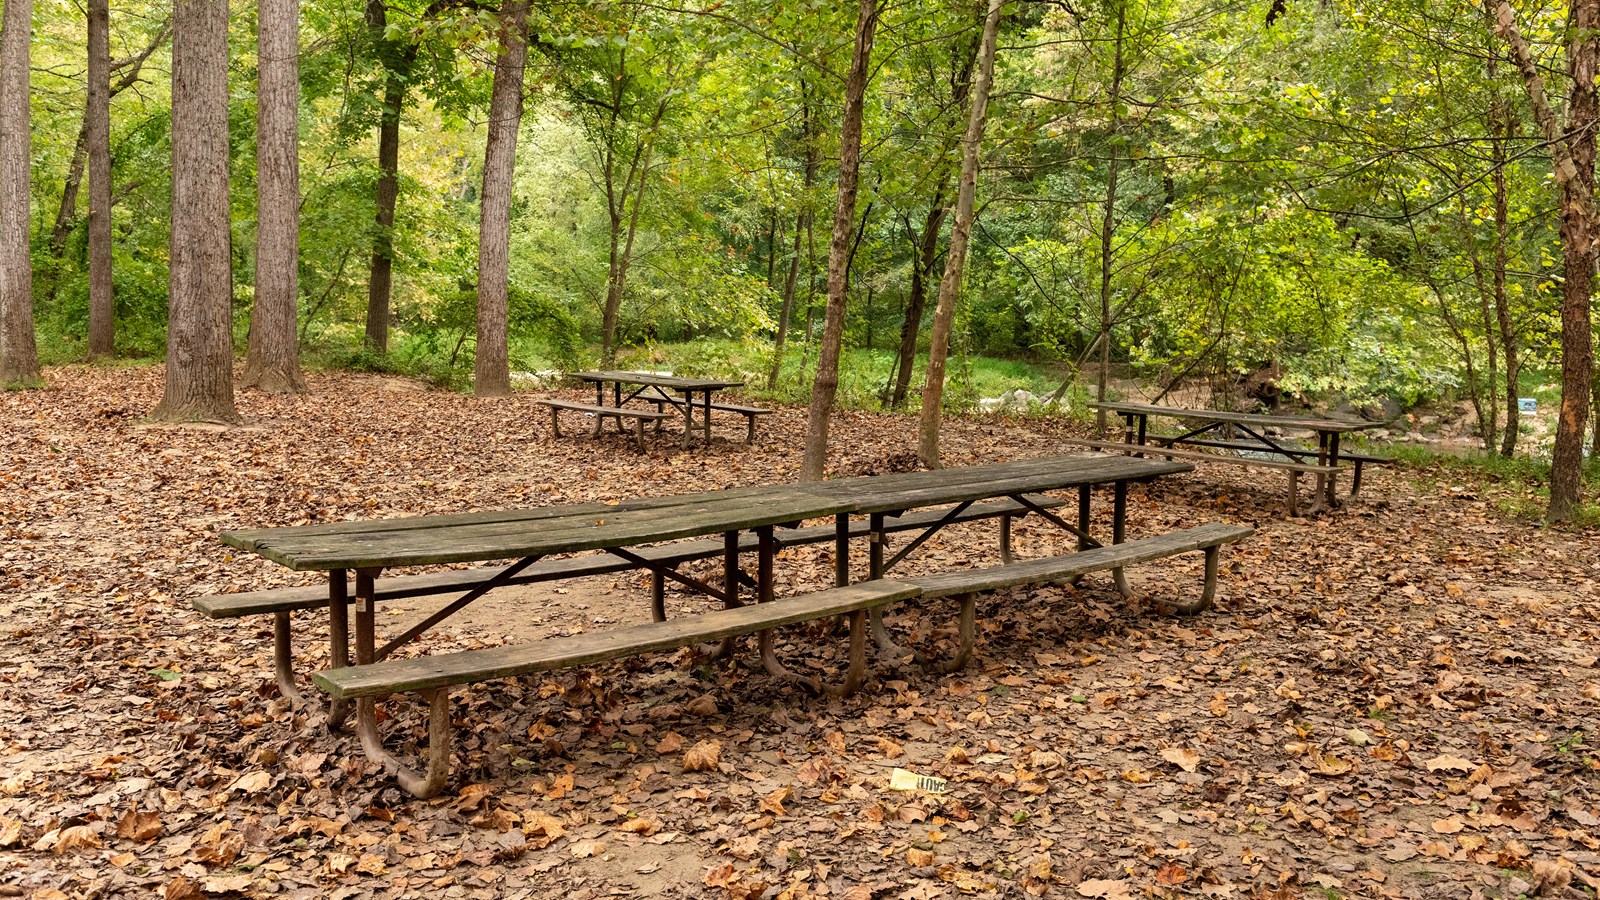 Four picnic benches in the woods.